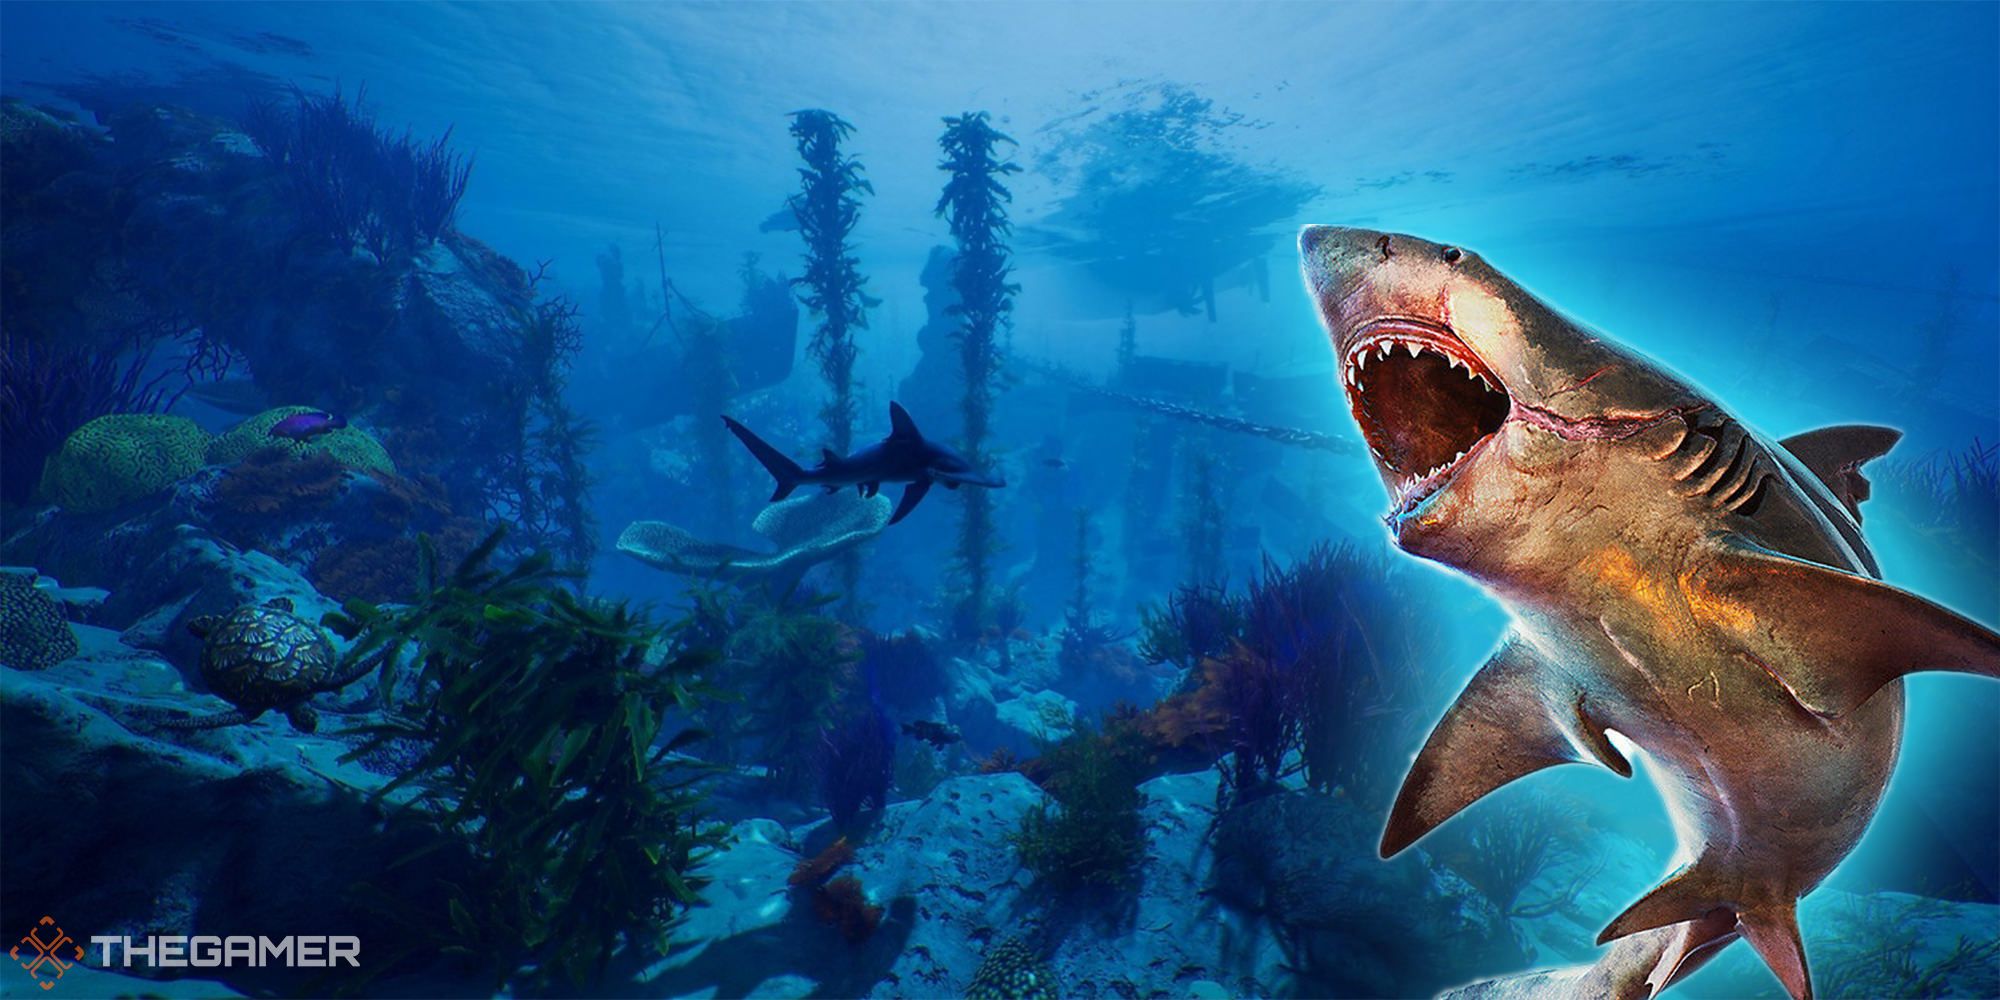 THE BEST SHARK GAME EVER! : MANEATER REVIEW 